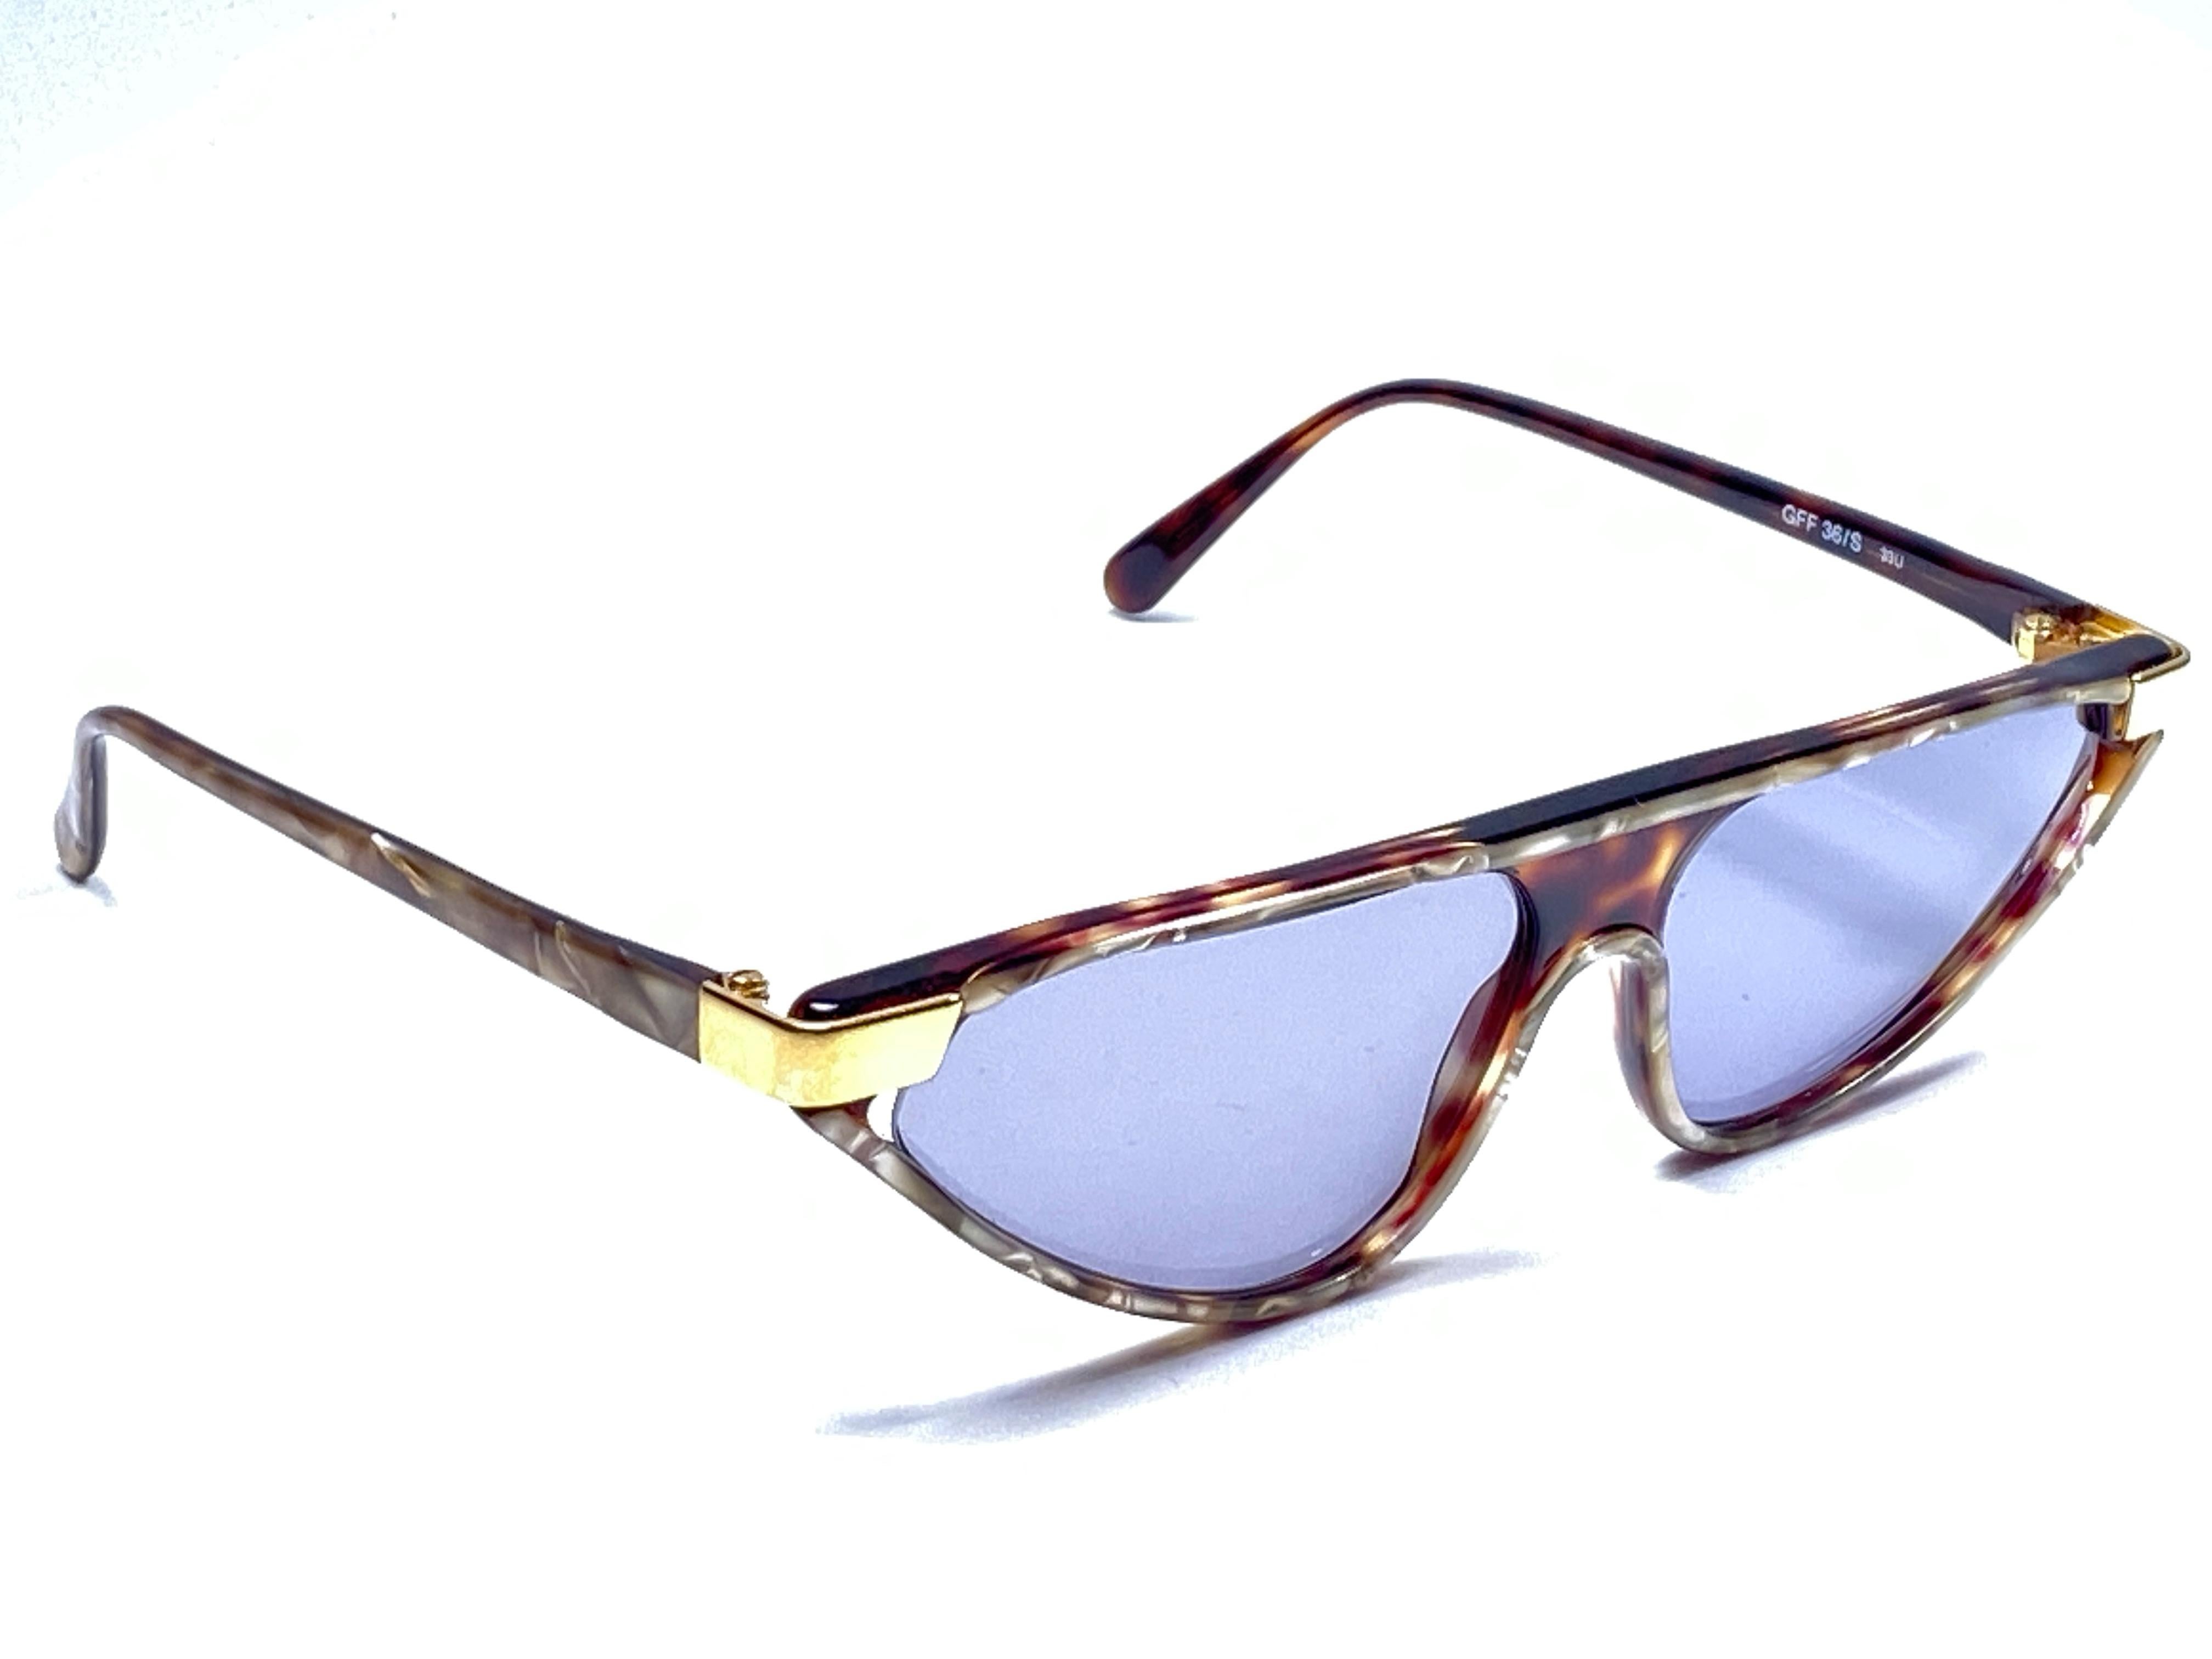 New vintage Gianfranco Ferre sunglasses.    

Gold and tortoise details frame holding a pair of spotless grey lenses.   

New, never worn or displayed. 

 Made in Italy.

MEASUREMENTS 



FRONT : 15 CMS

LENS HEIGHT : 3.5 CMS

LENS WIDTH : 6 CMS
